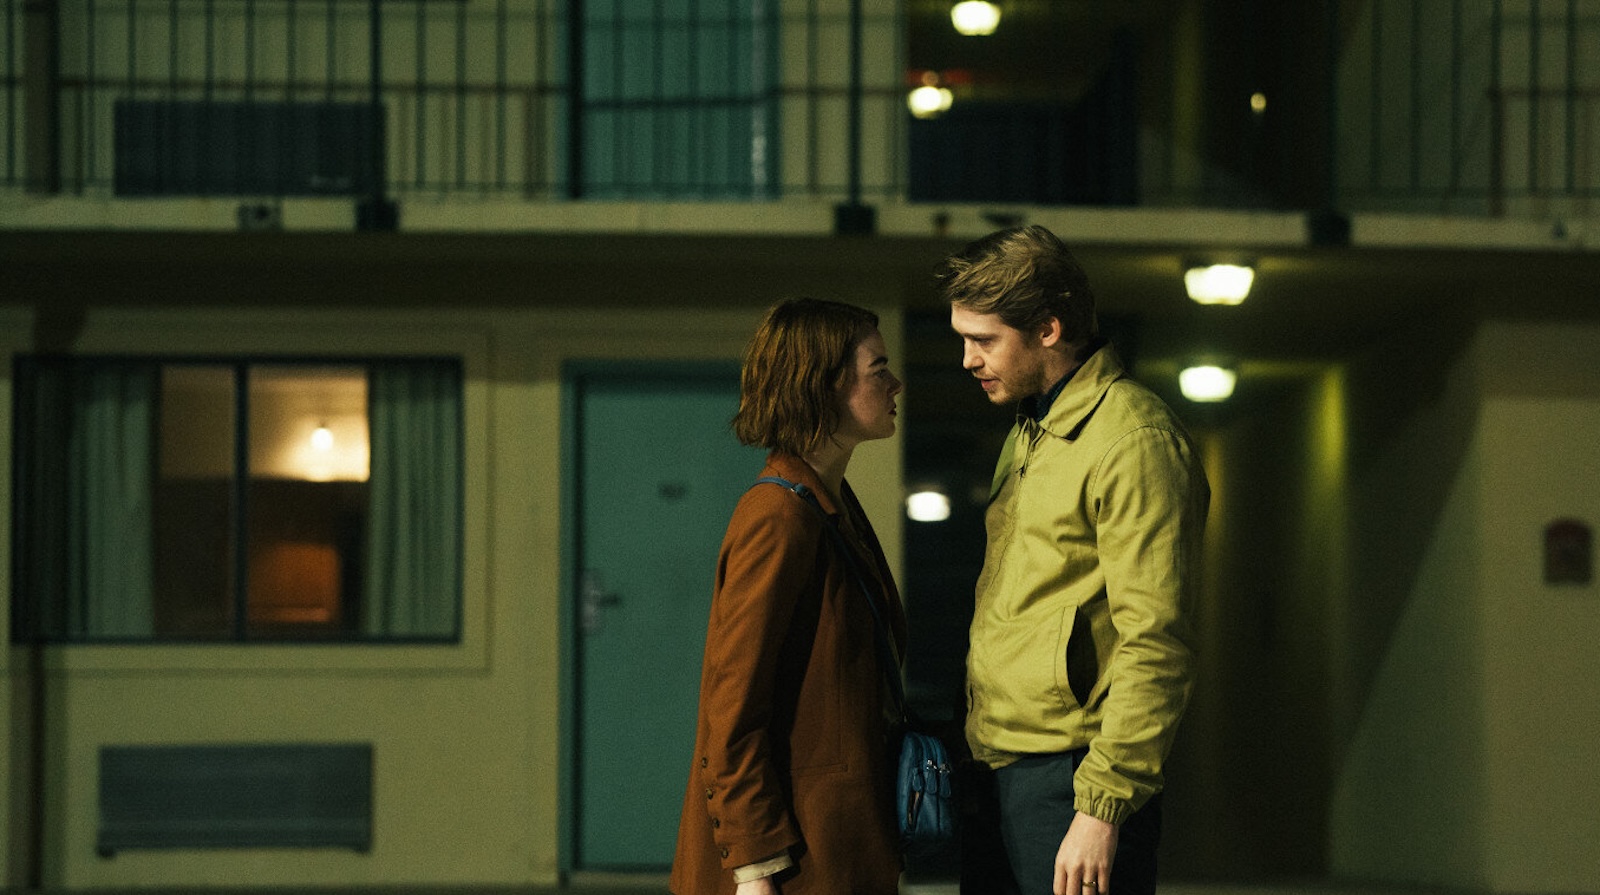 A woman in a burgundy coat and short reddish hair and a blond man in a crumply beige members-only jacket face each other intensely on the street in front of a motel.